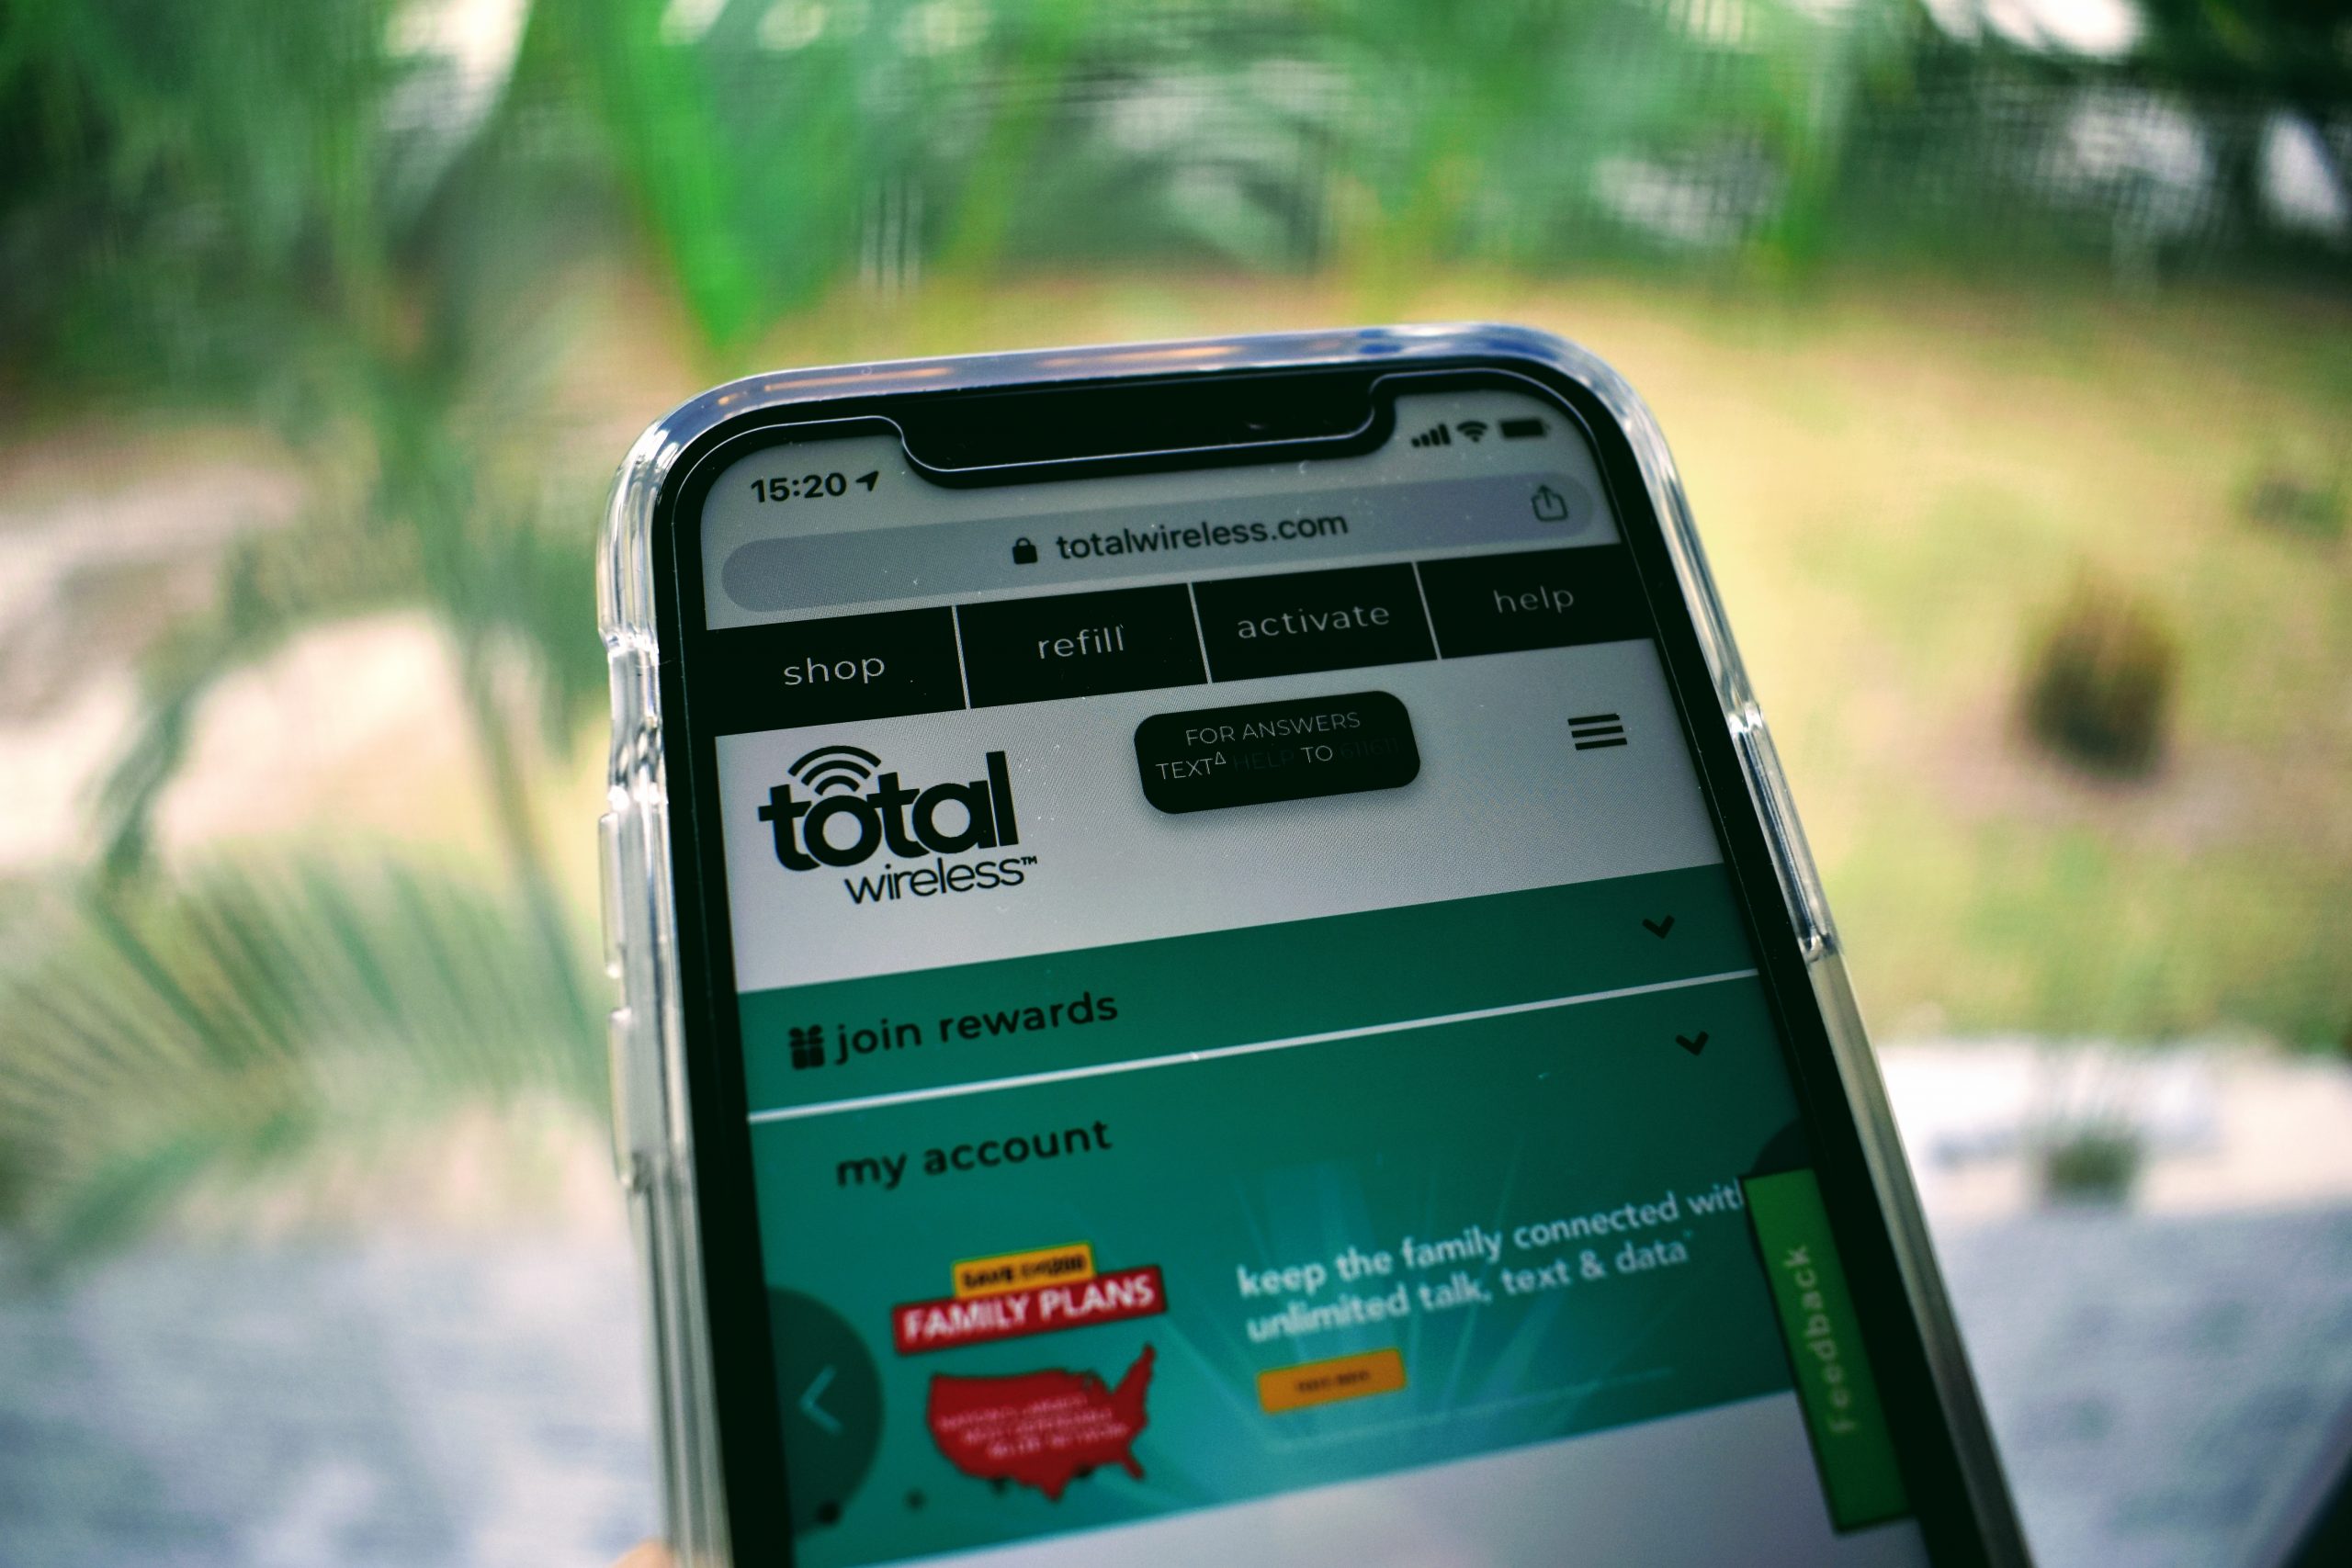 Total Wireless: Network, plans, prices, and reviews